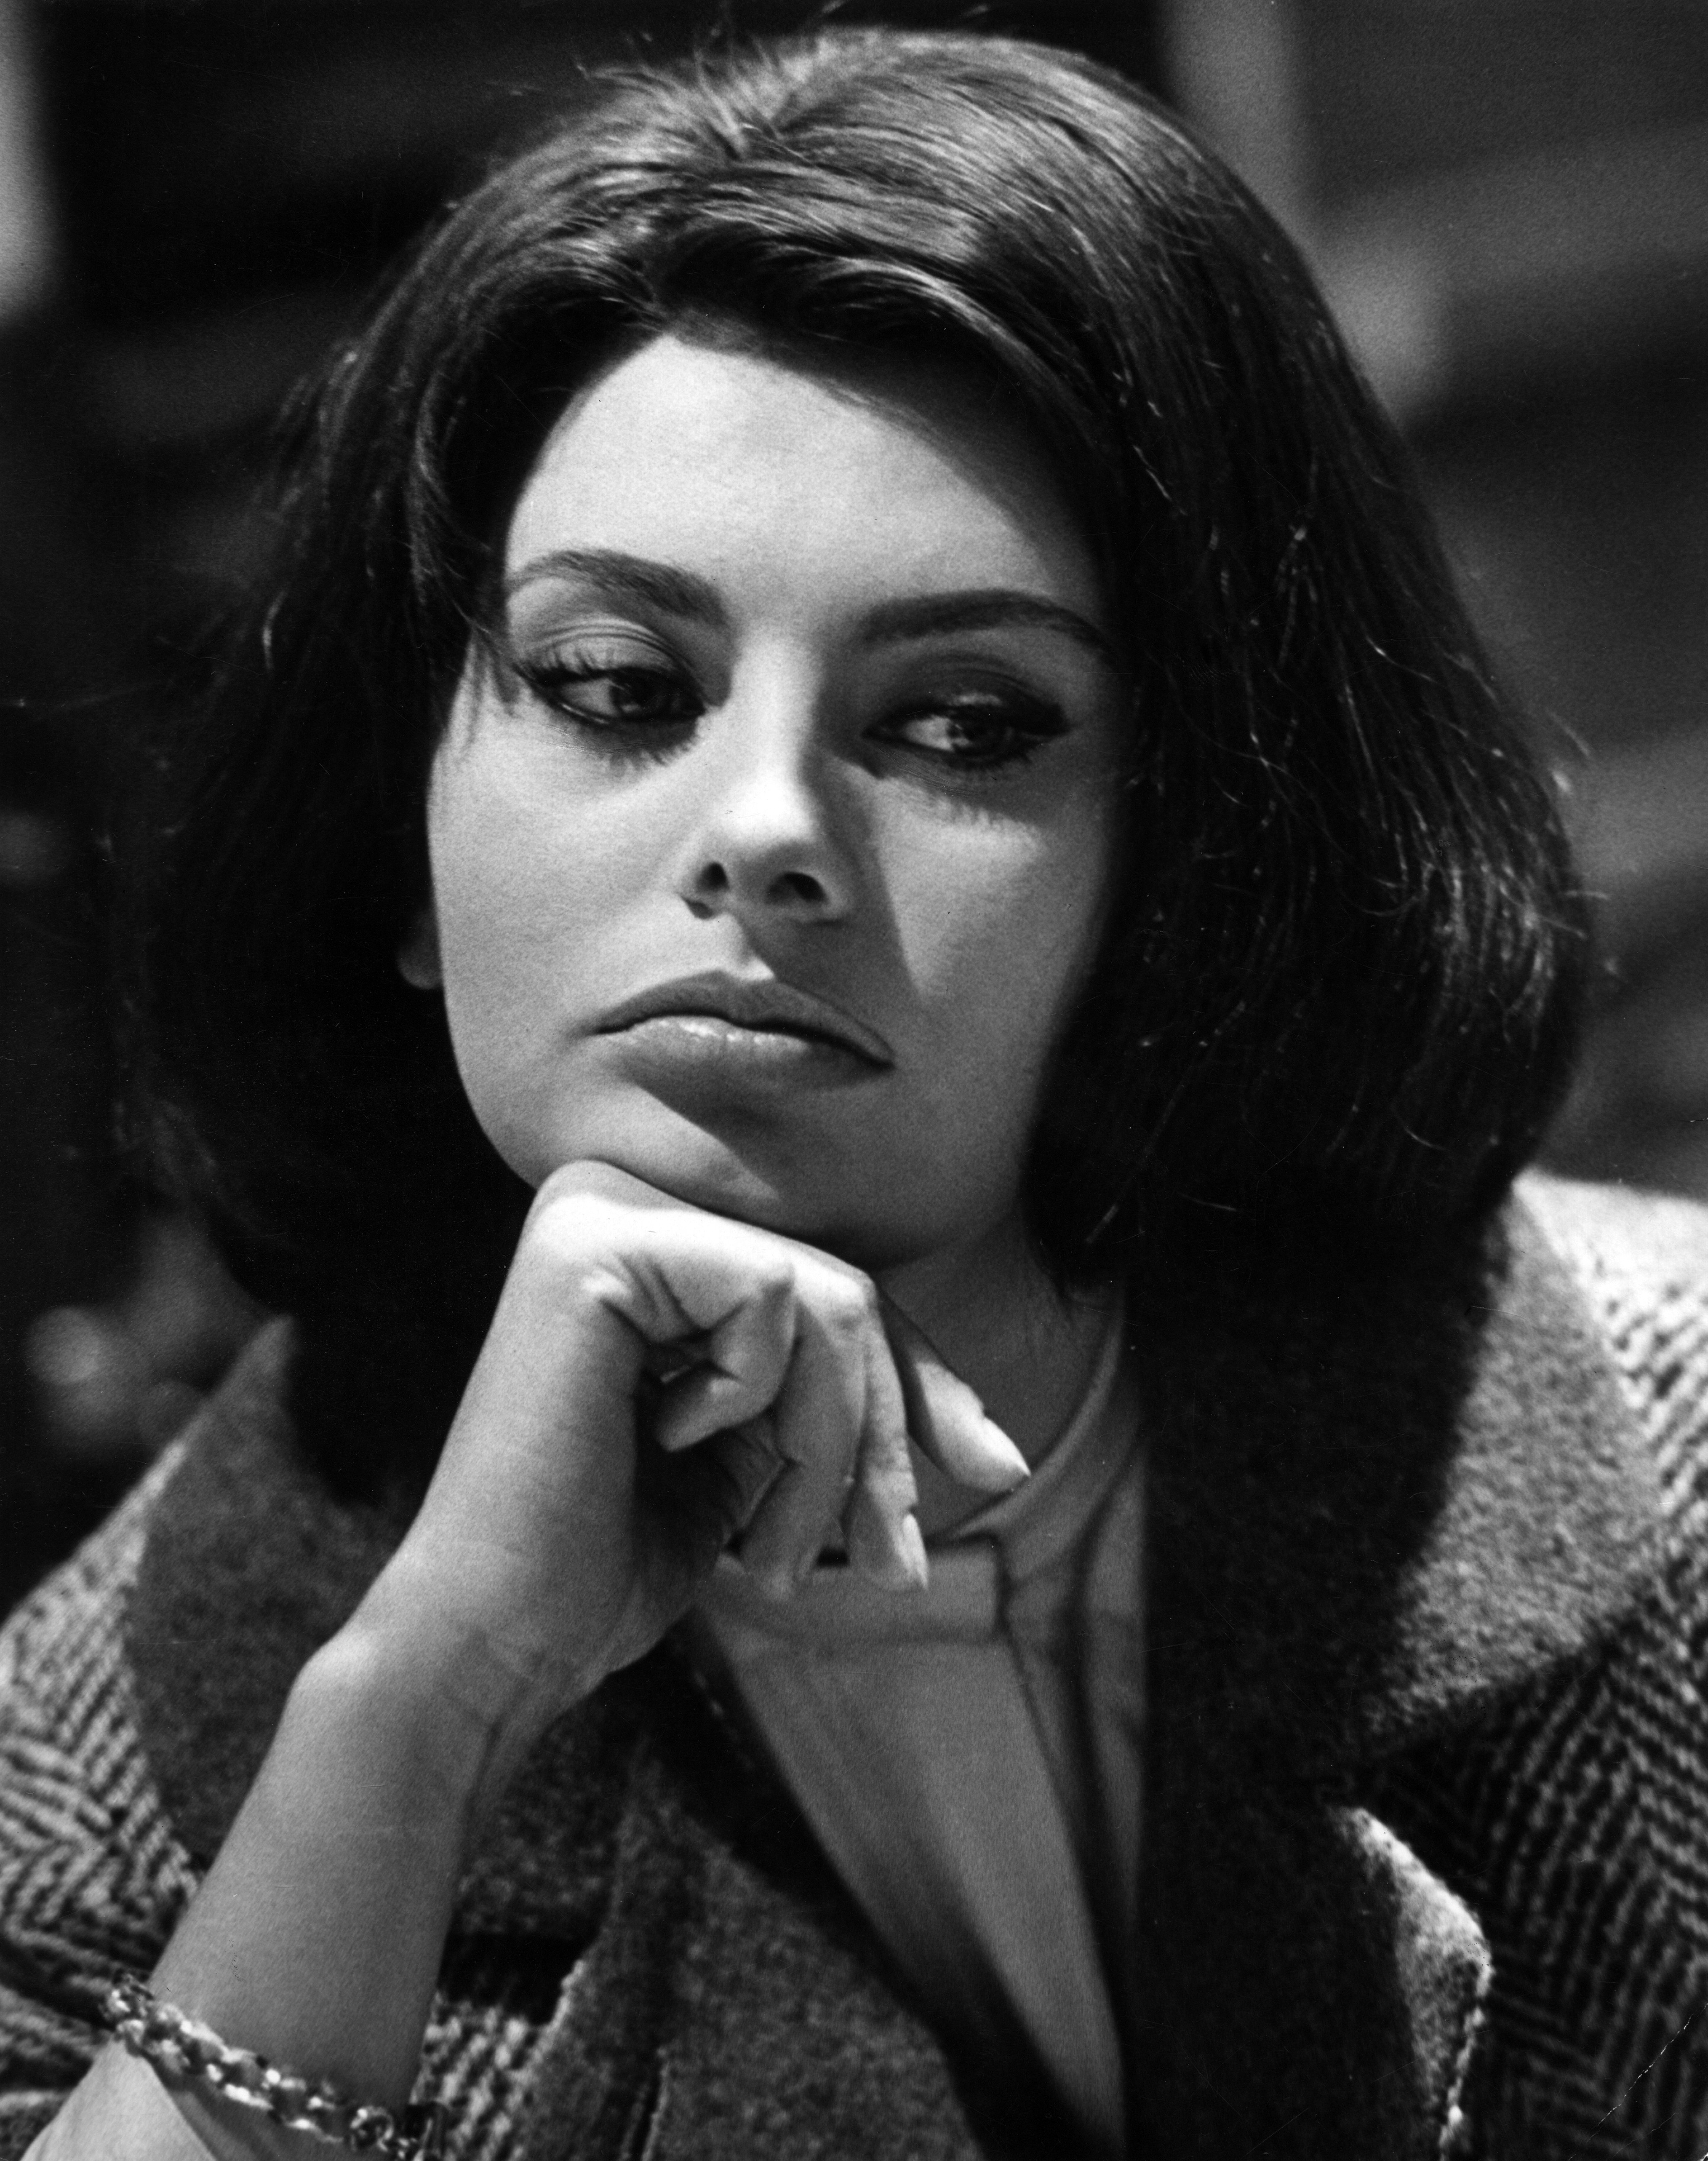 History making Oscar winner Sophia Loren in a scene of "Five Miles to Midnight," 1962. | Photo: Getty Images